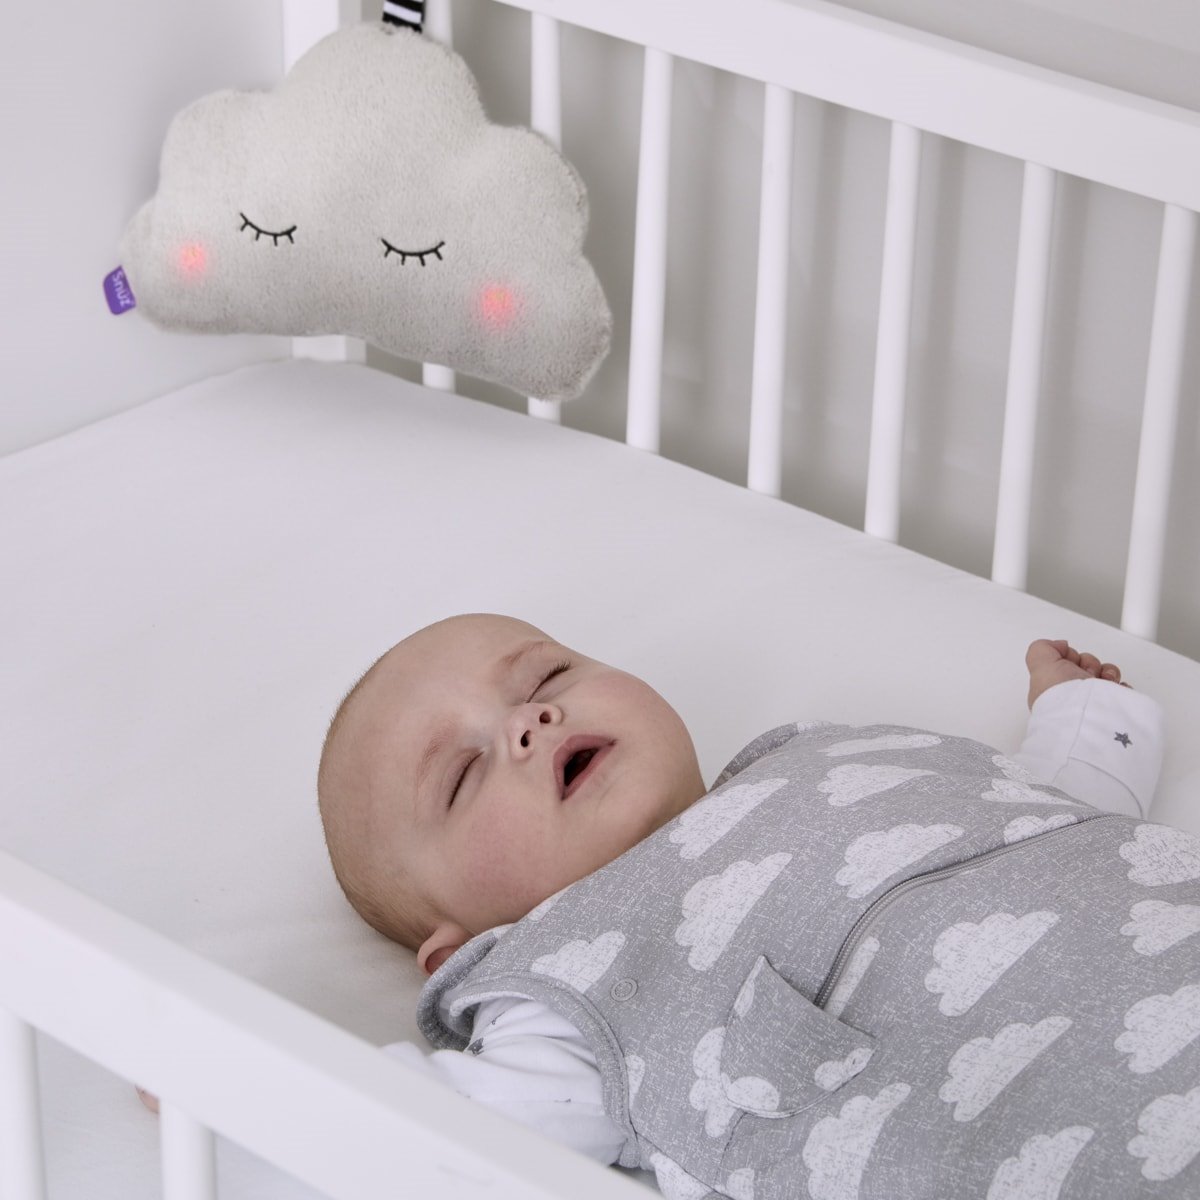 SnuzCloud Baby Sleep Aid, Free Next Day Delivery